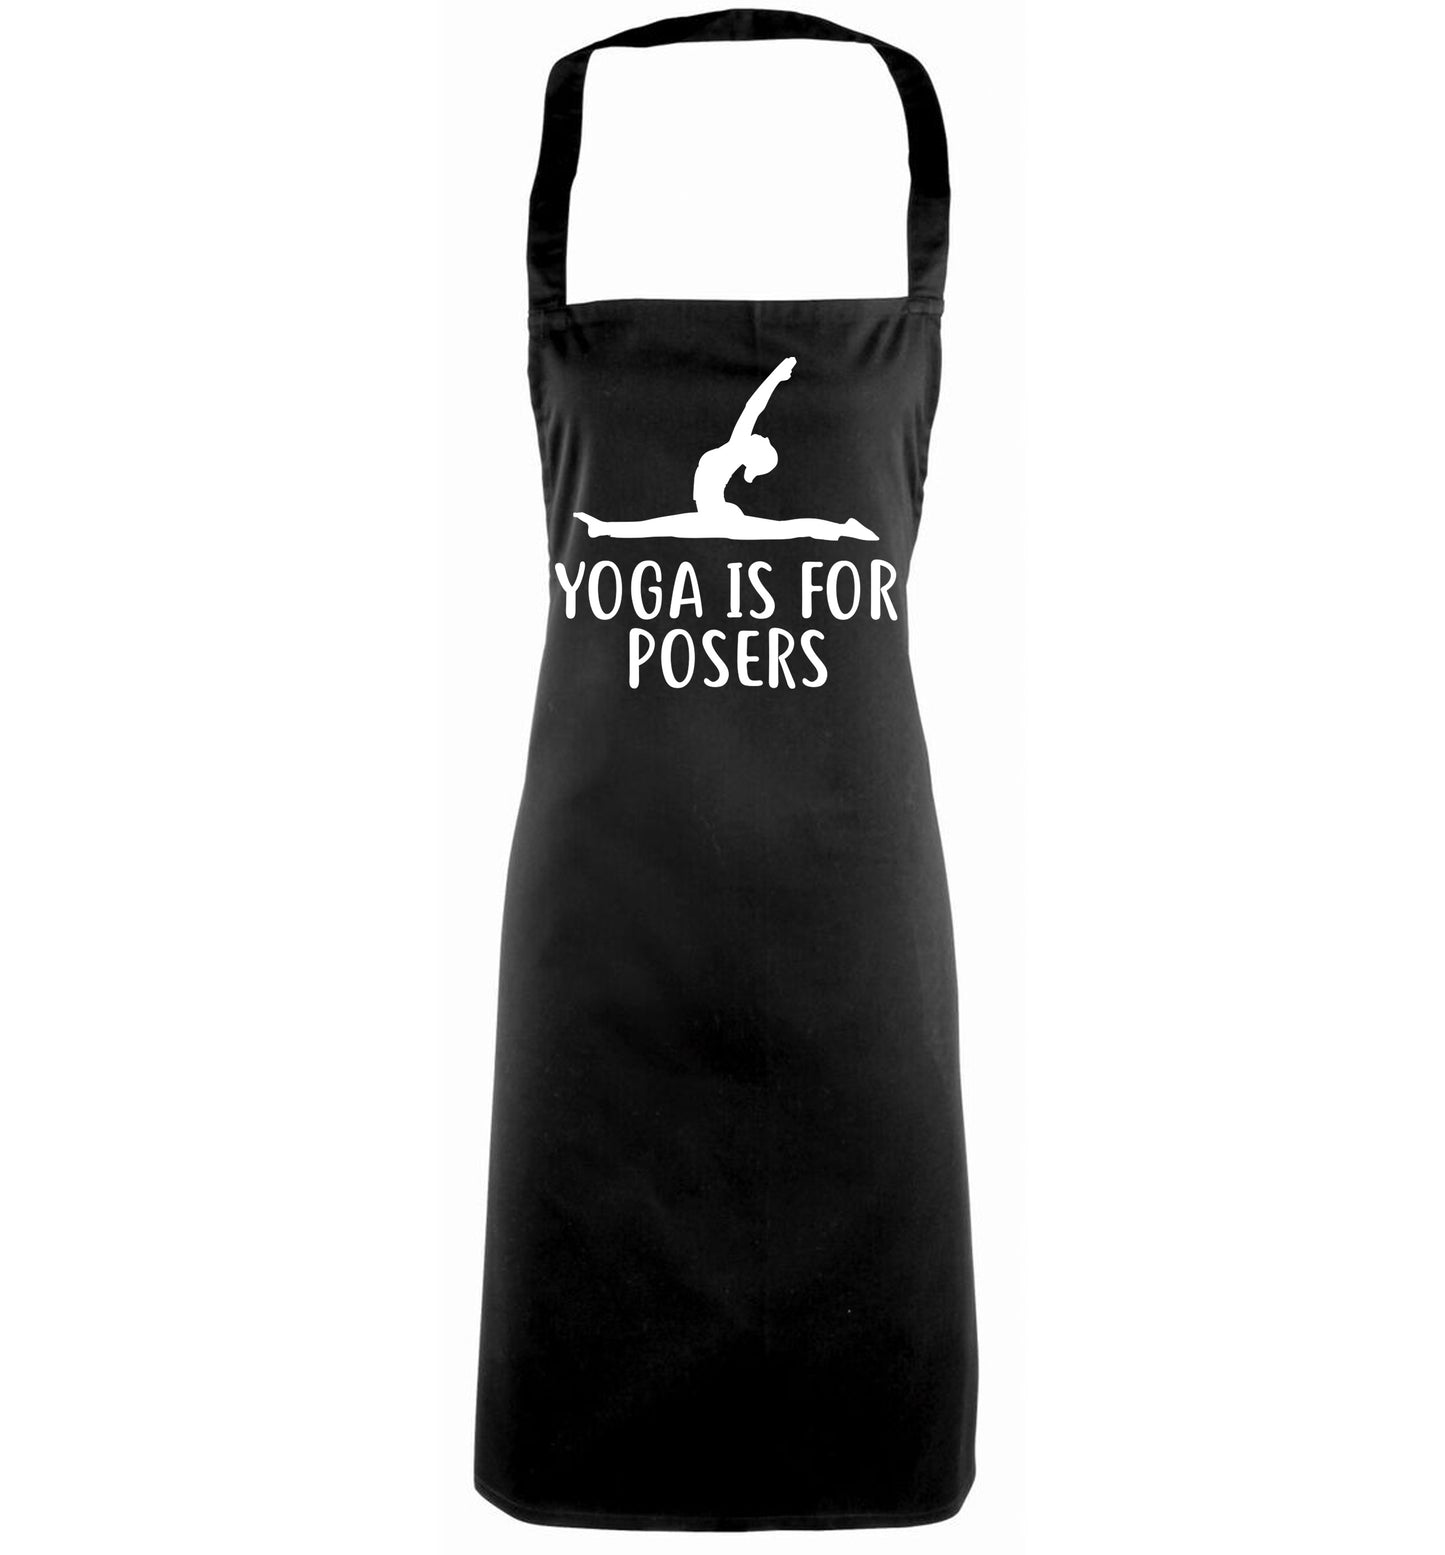 Yoga is for posers black apron